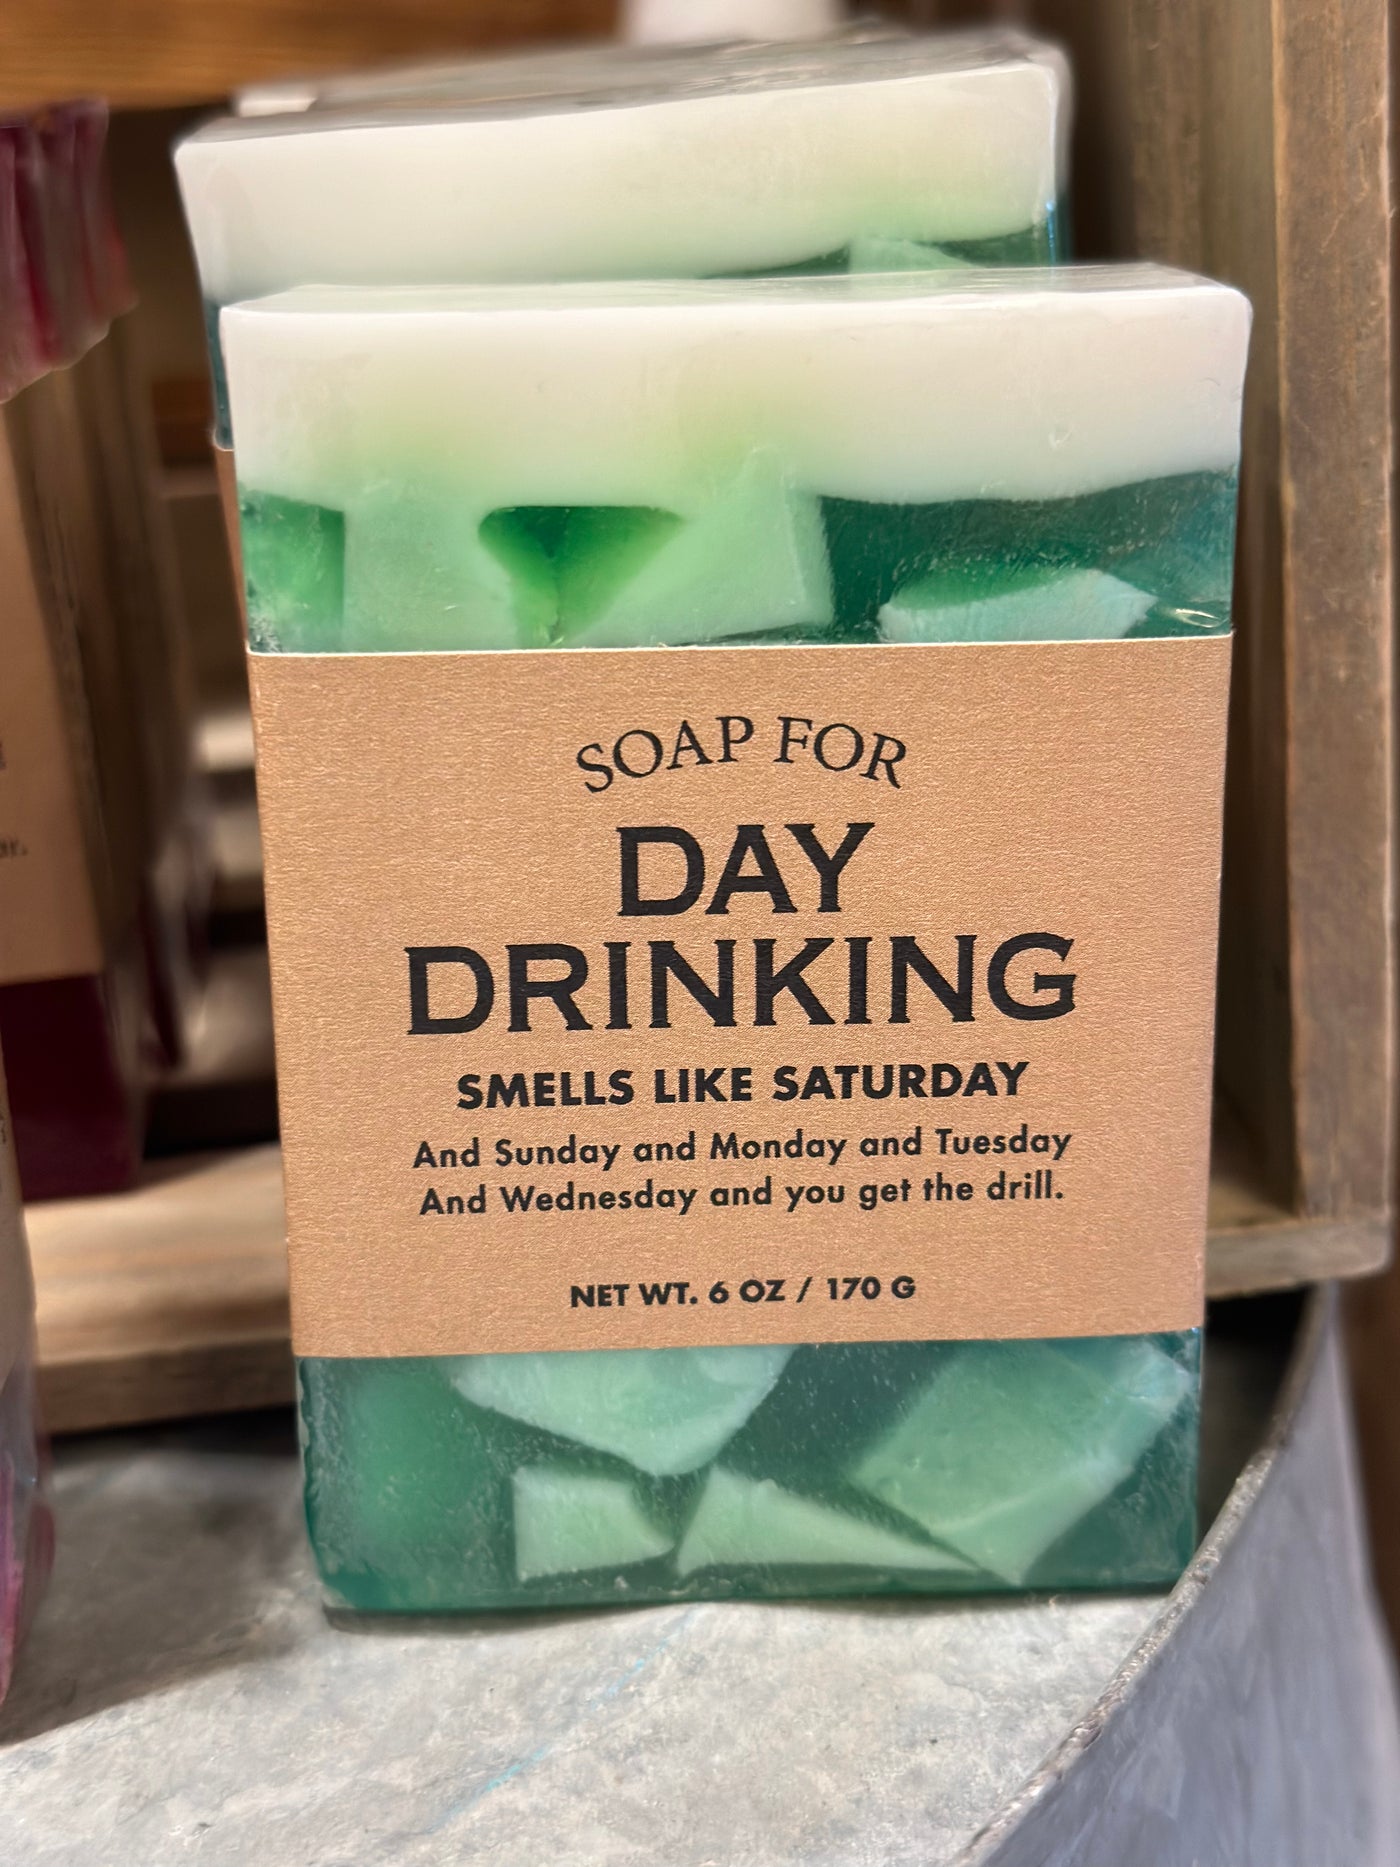 A Soap For.....